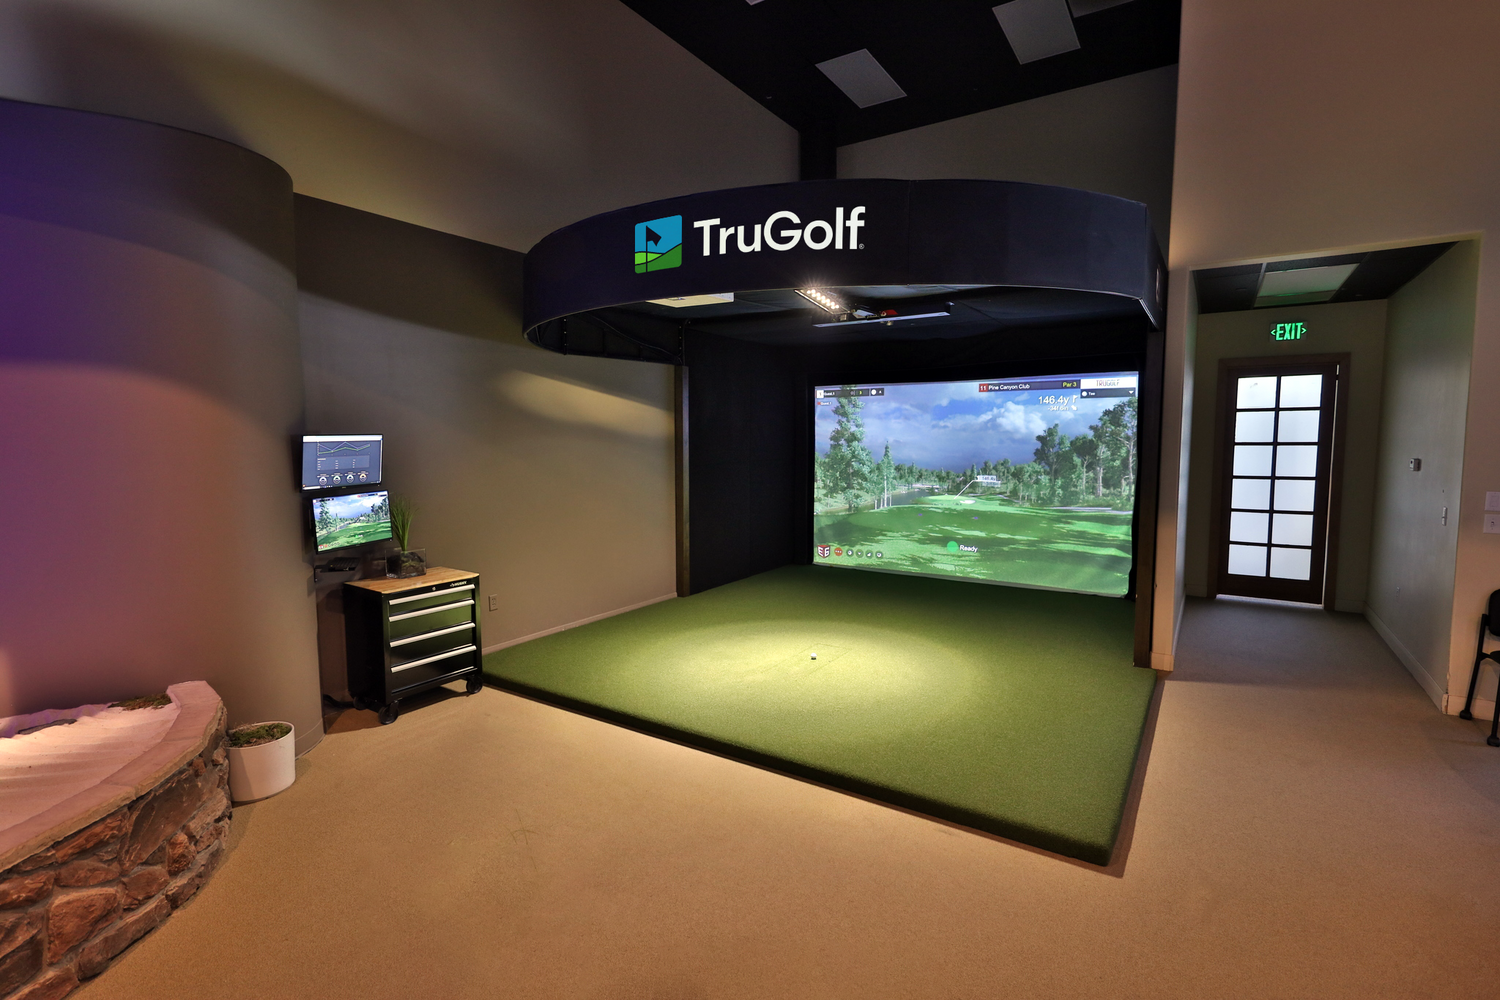 Showroom of TruGolf's commercial golf simulator